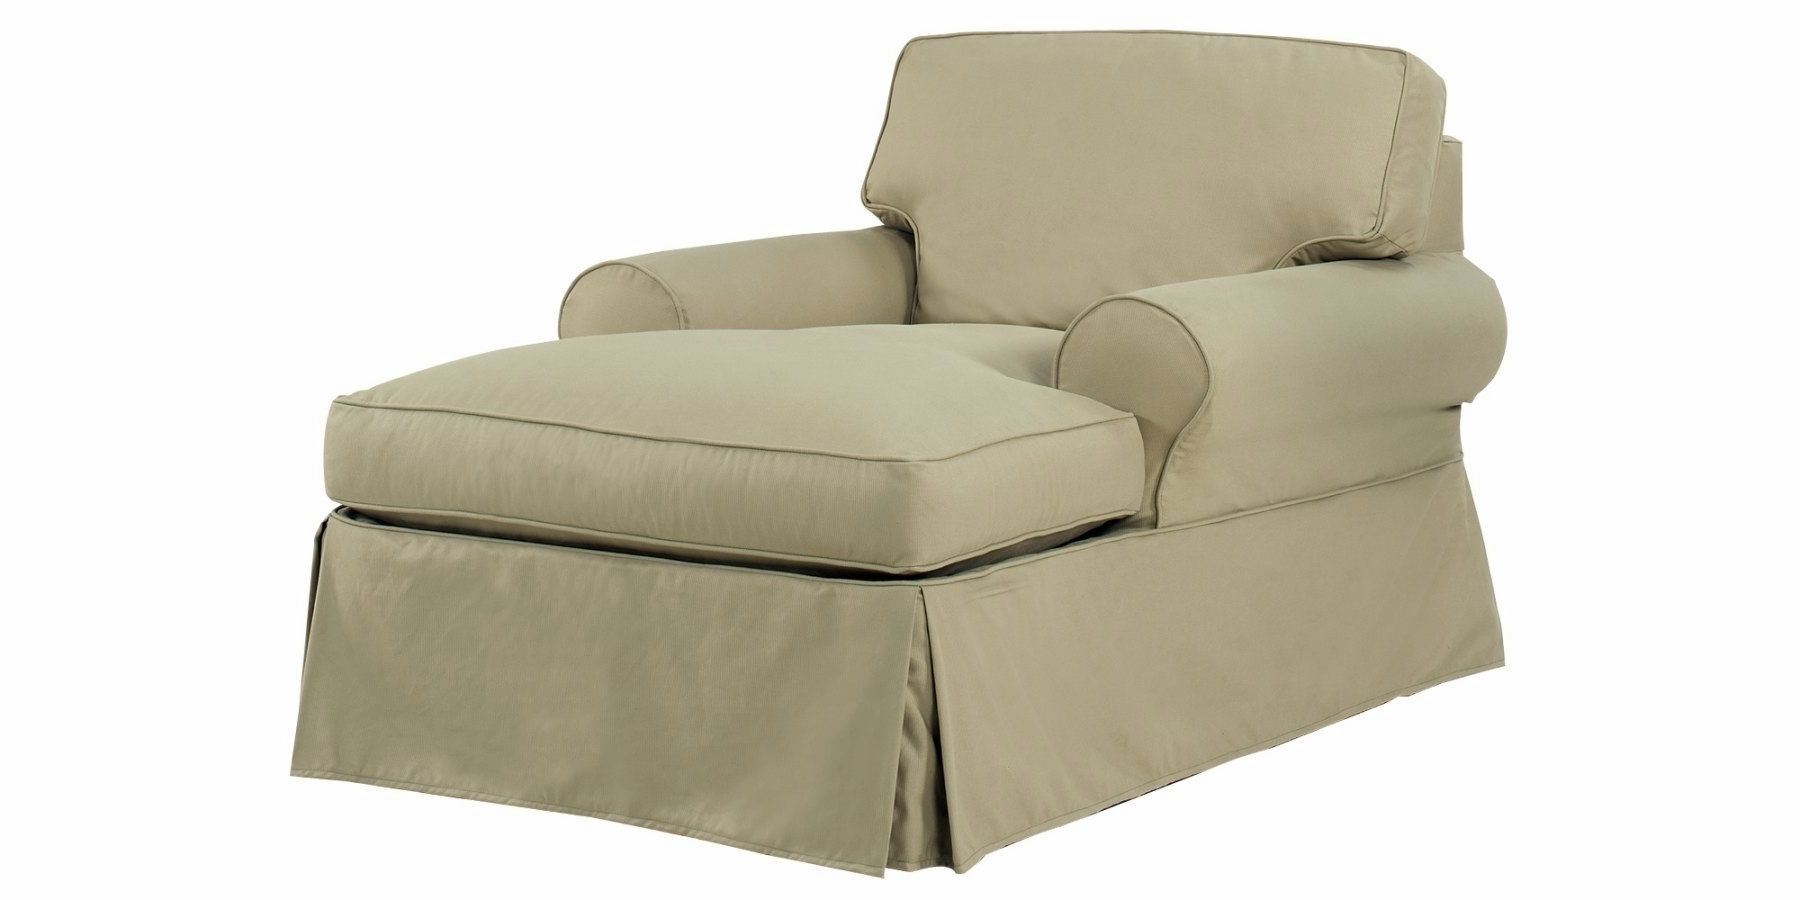 Double Chaise Lounge Chair Cover • Lounge Chairs Ideas Intended For Famous Chaise Lounge Chairs With Arms Slipcover (View 1 of 15)